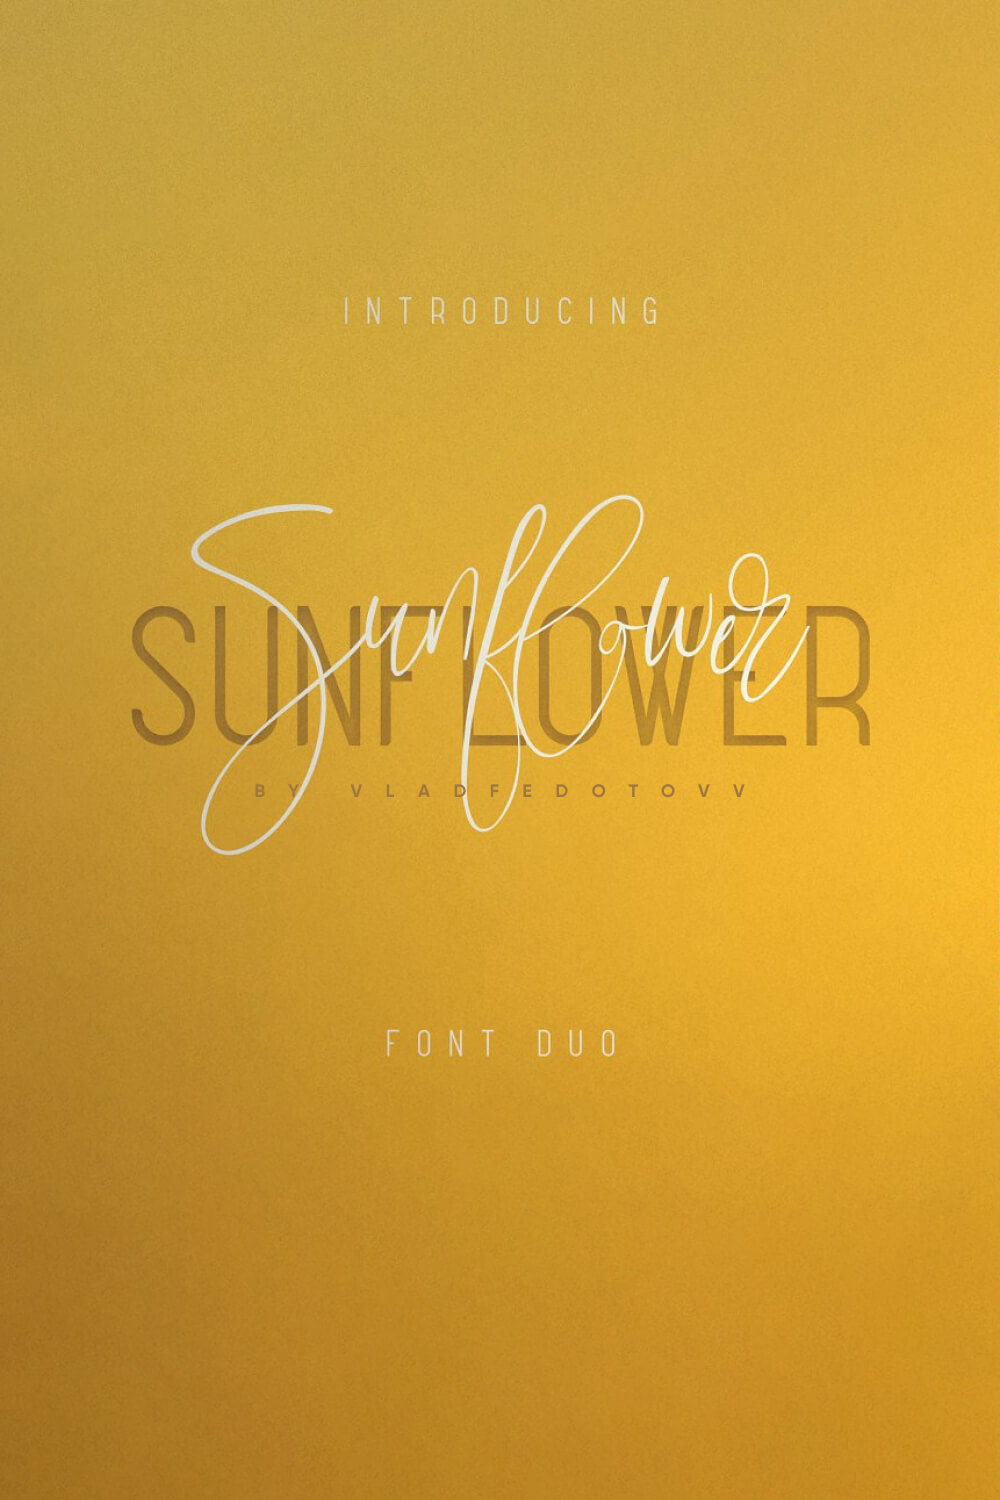 Sunflower Font Duo – Just now 19 pinterest image.